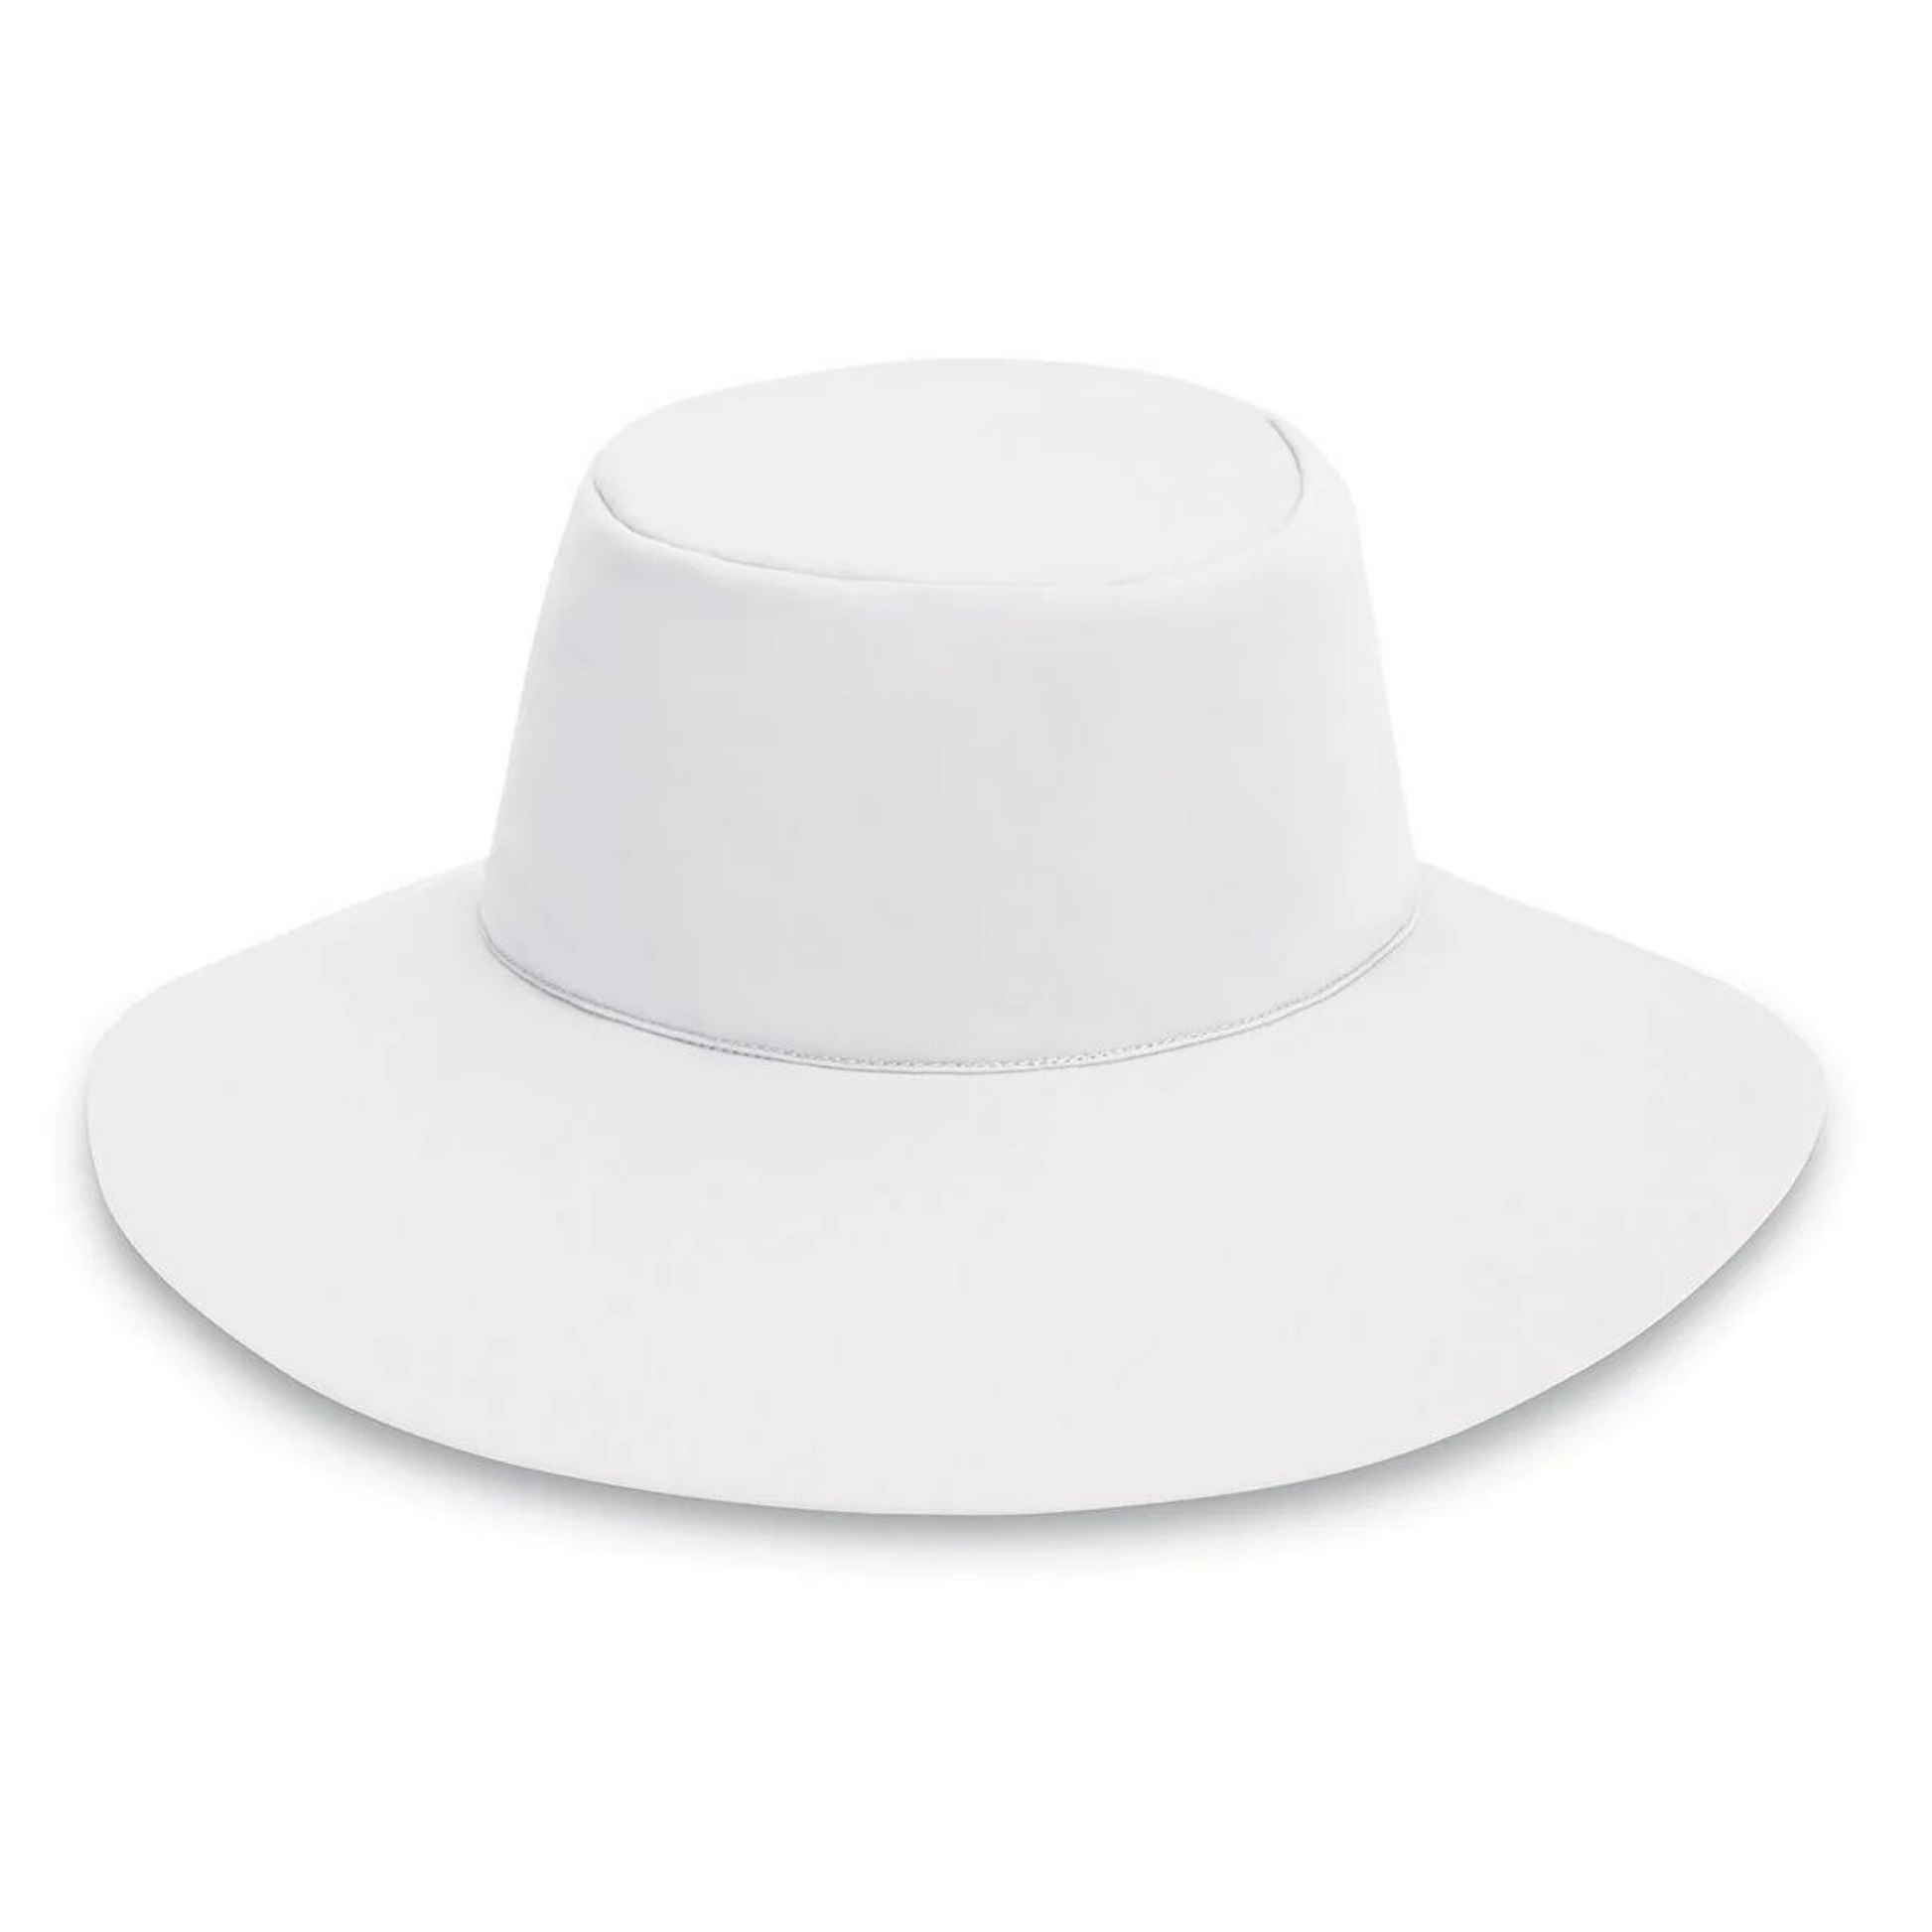 Side view of the hat, showing the brim and the whole hat.